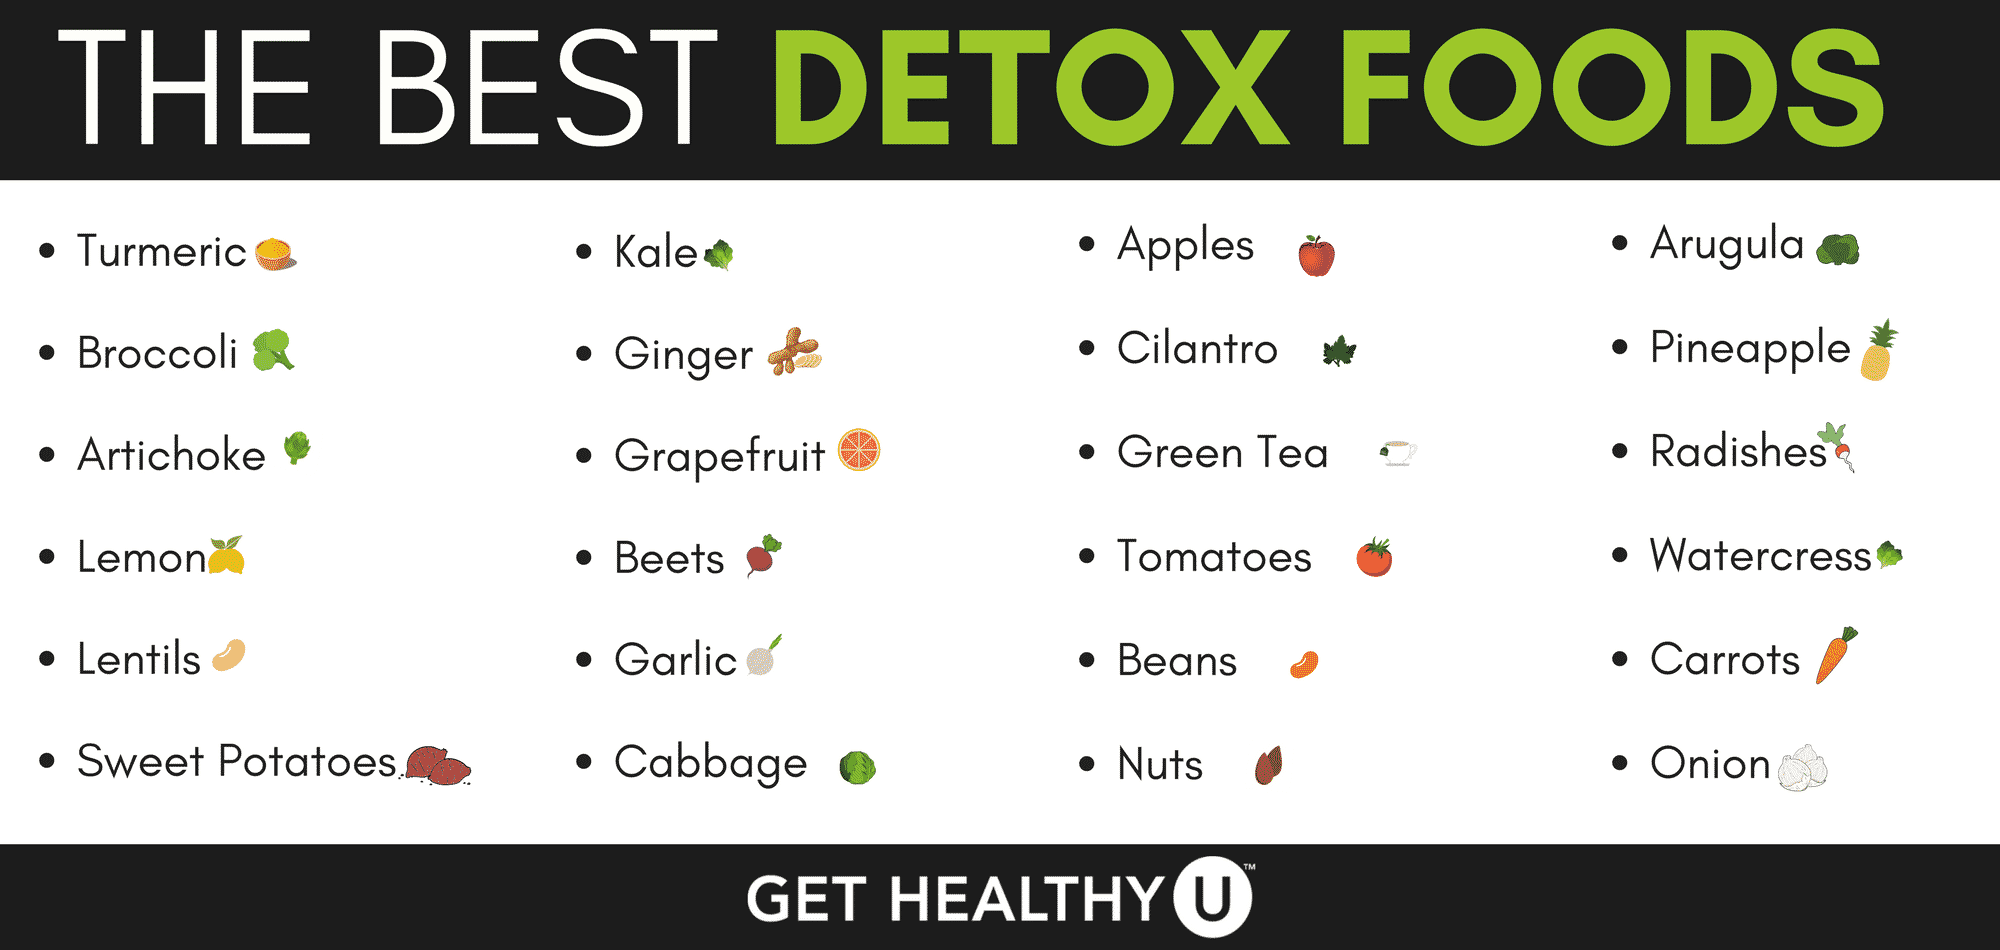 Don't fall for the pills and potions; check out the best foods to naturally detoxify your body and delicious recipes to incorporate them!